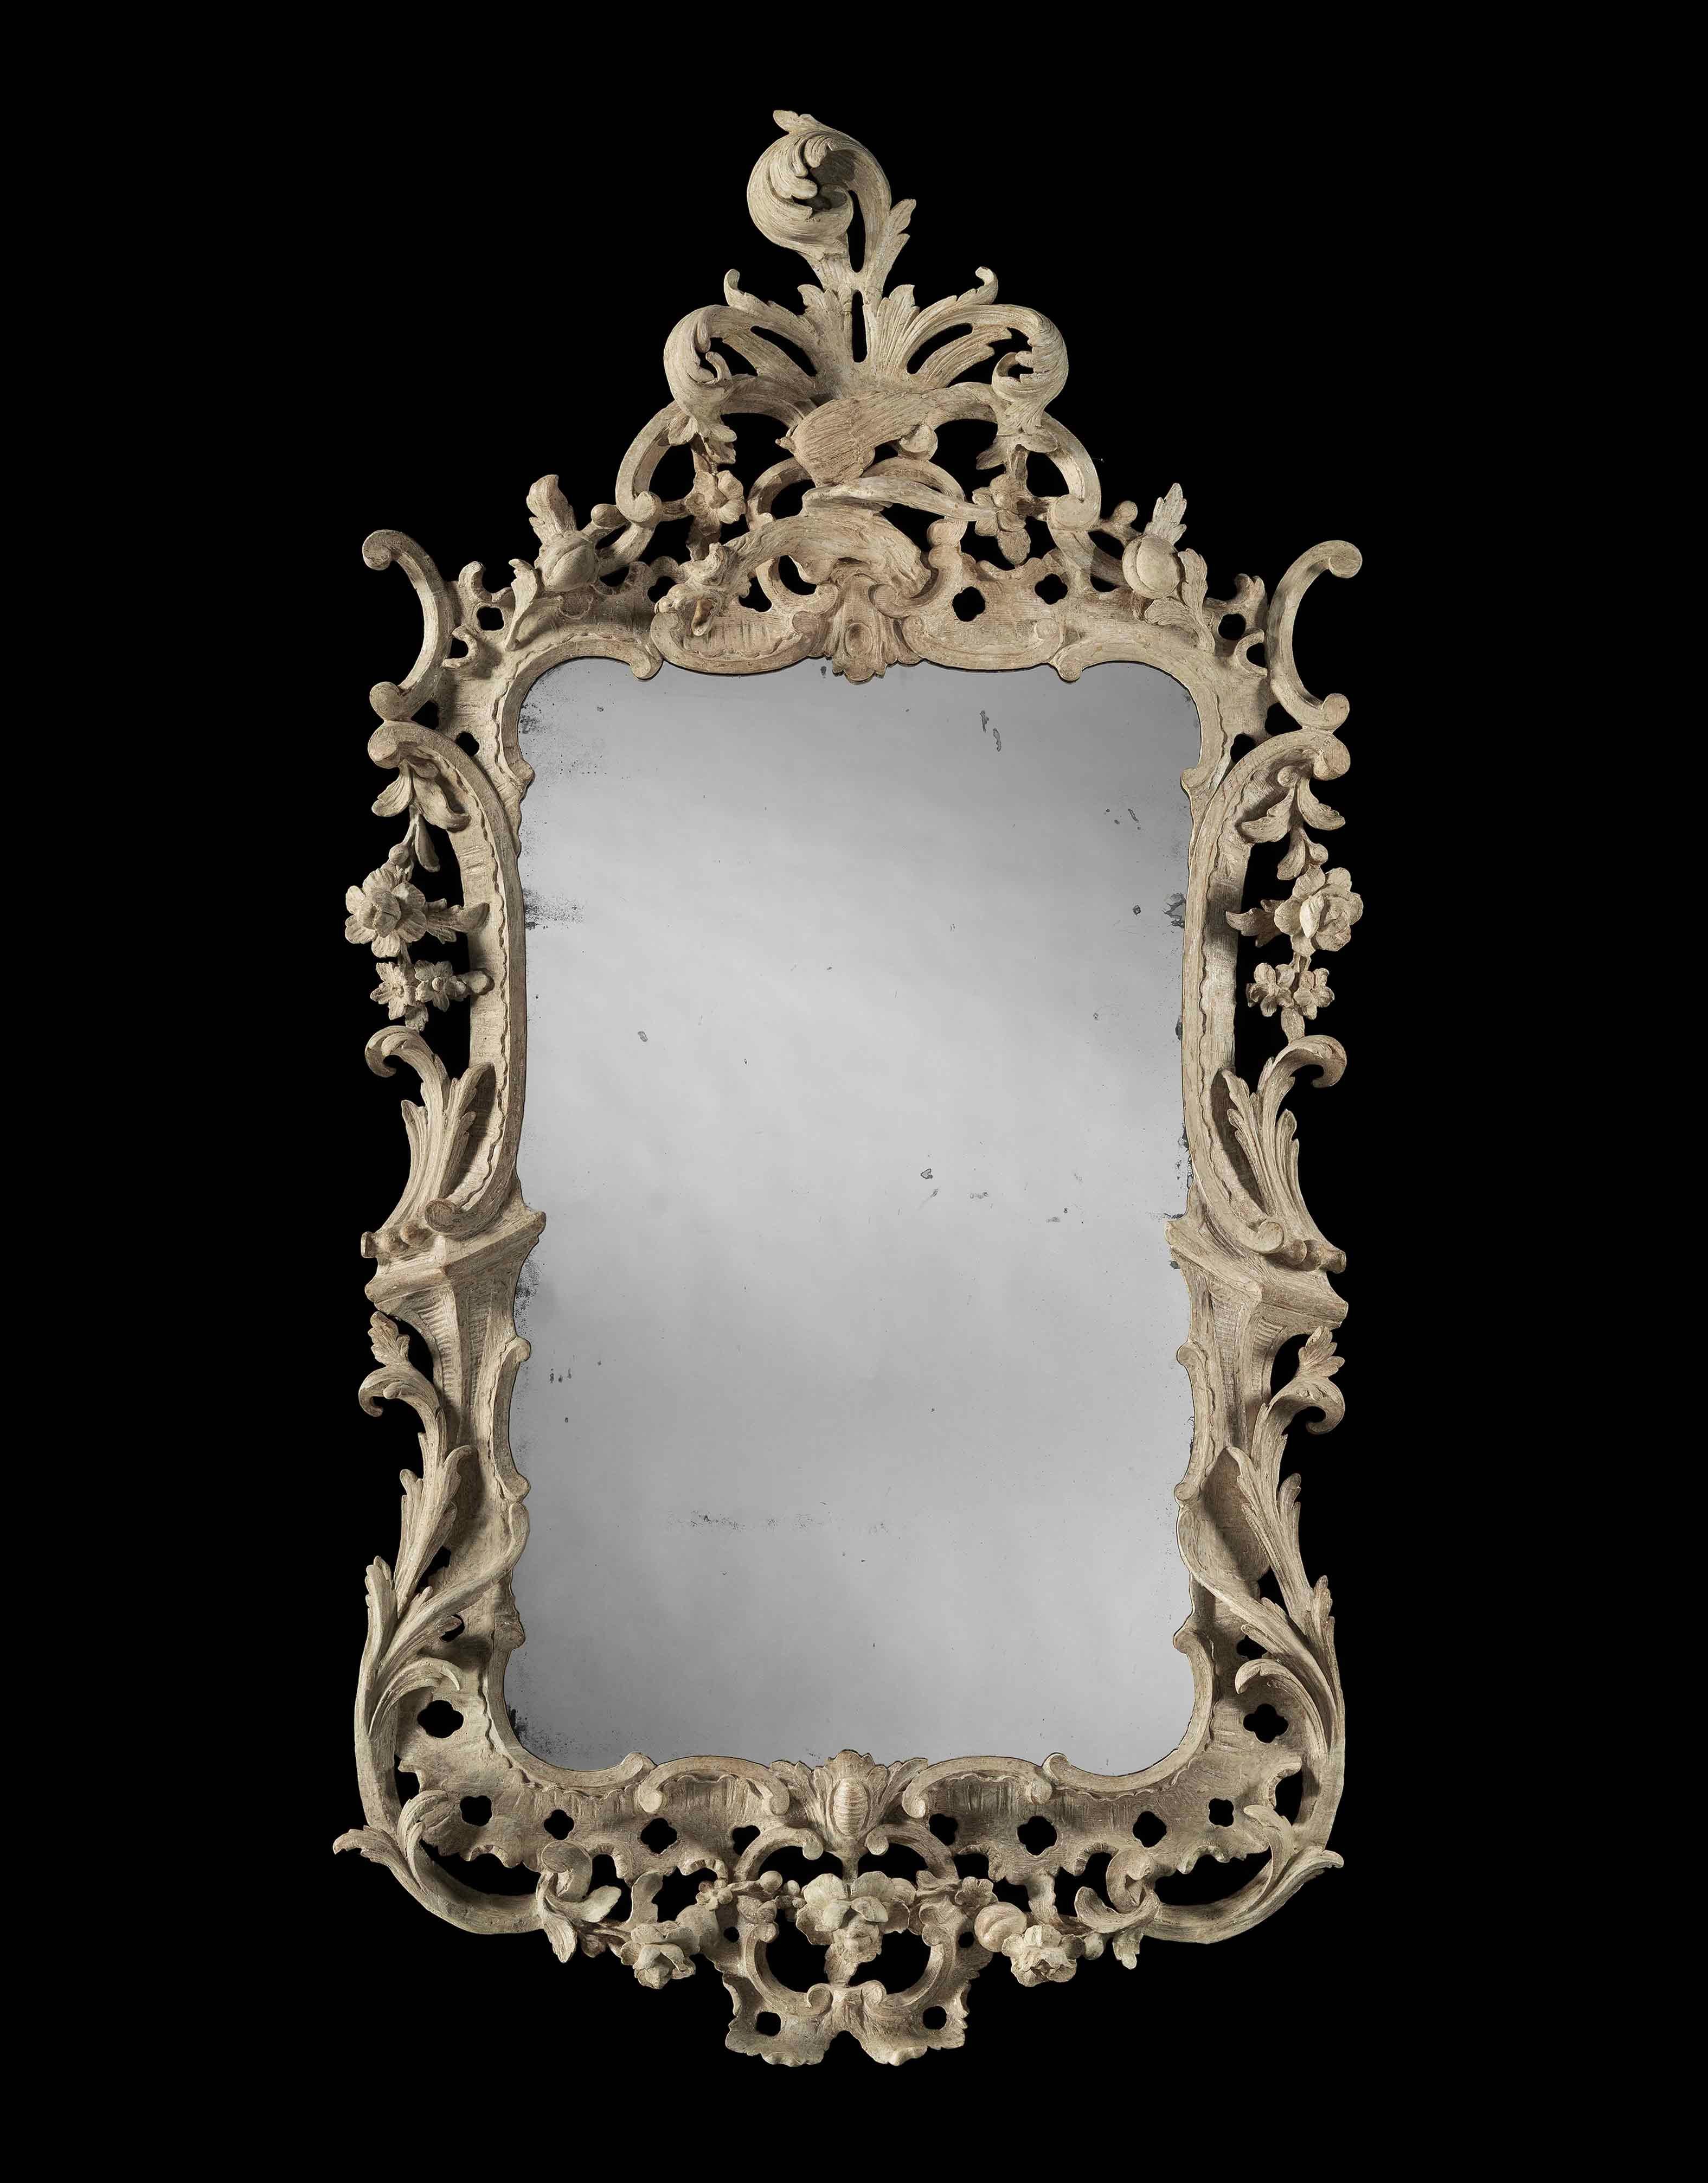 This stunning mirror retains its original paint finish, the cresting with a central carved ho ho bird, perched in front of a spray of flowing acanthus, with c scrolls and carved flowers. The side is decorated with c scrolls, palm leaves, flowers and